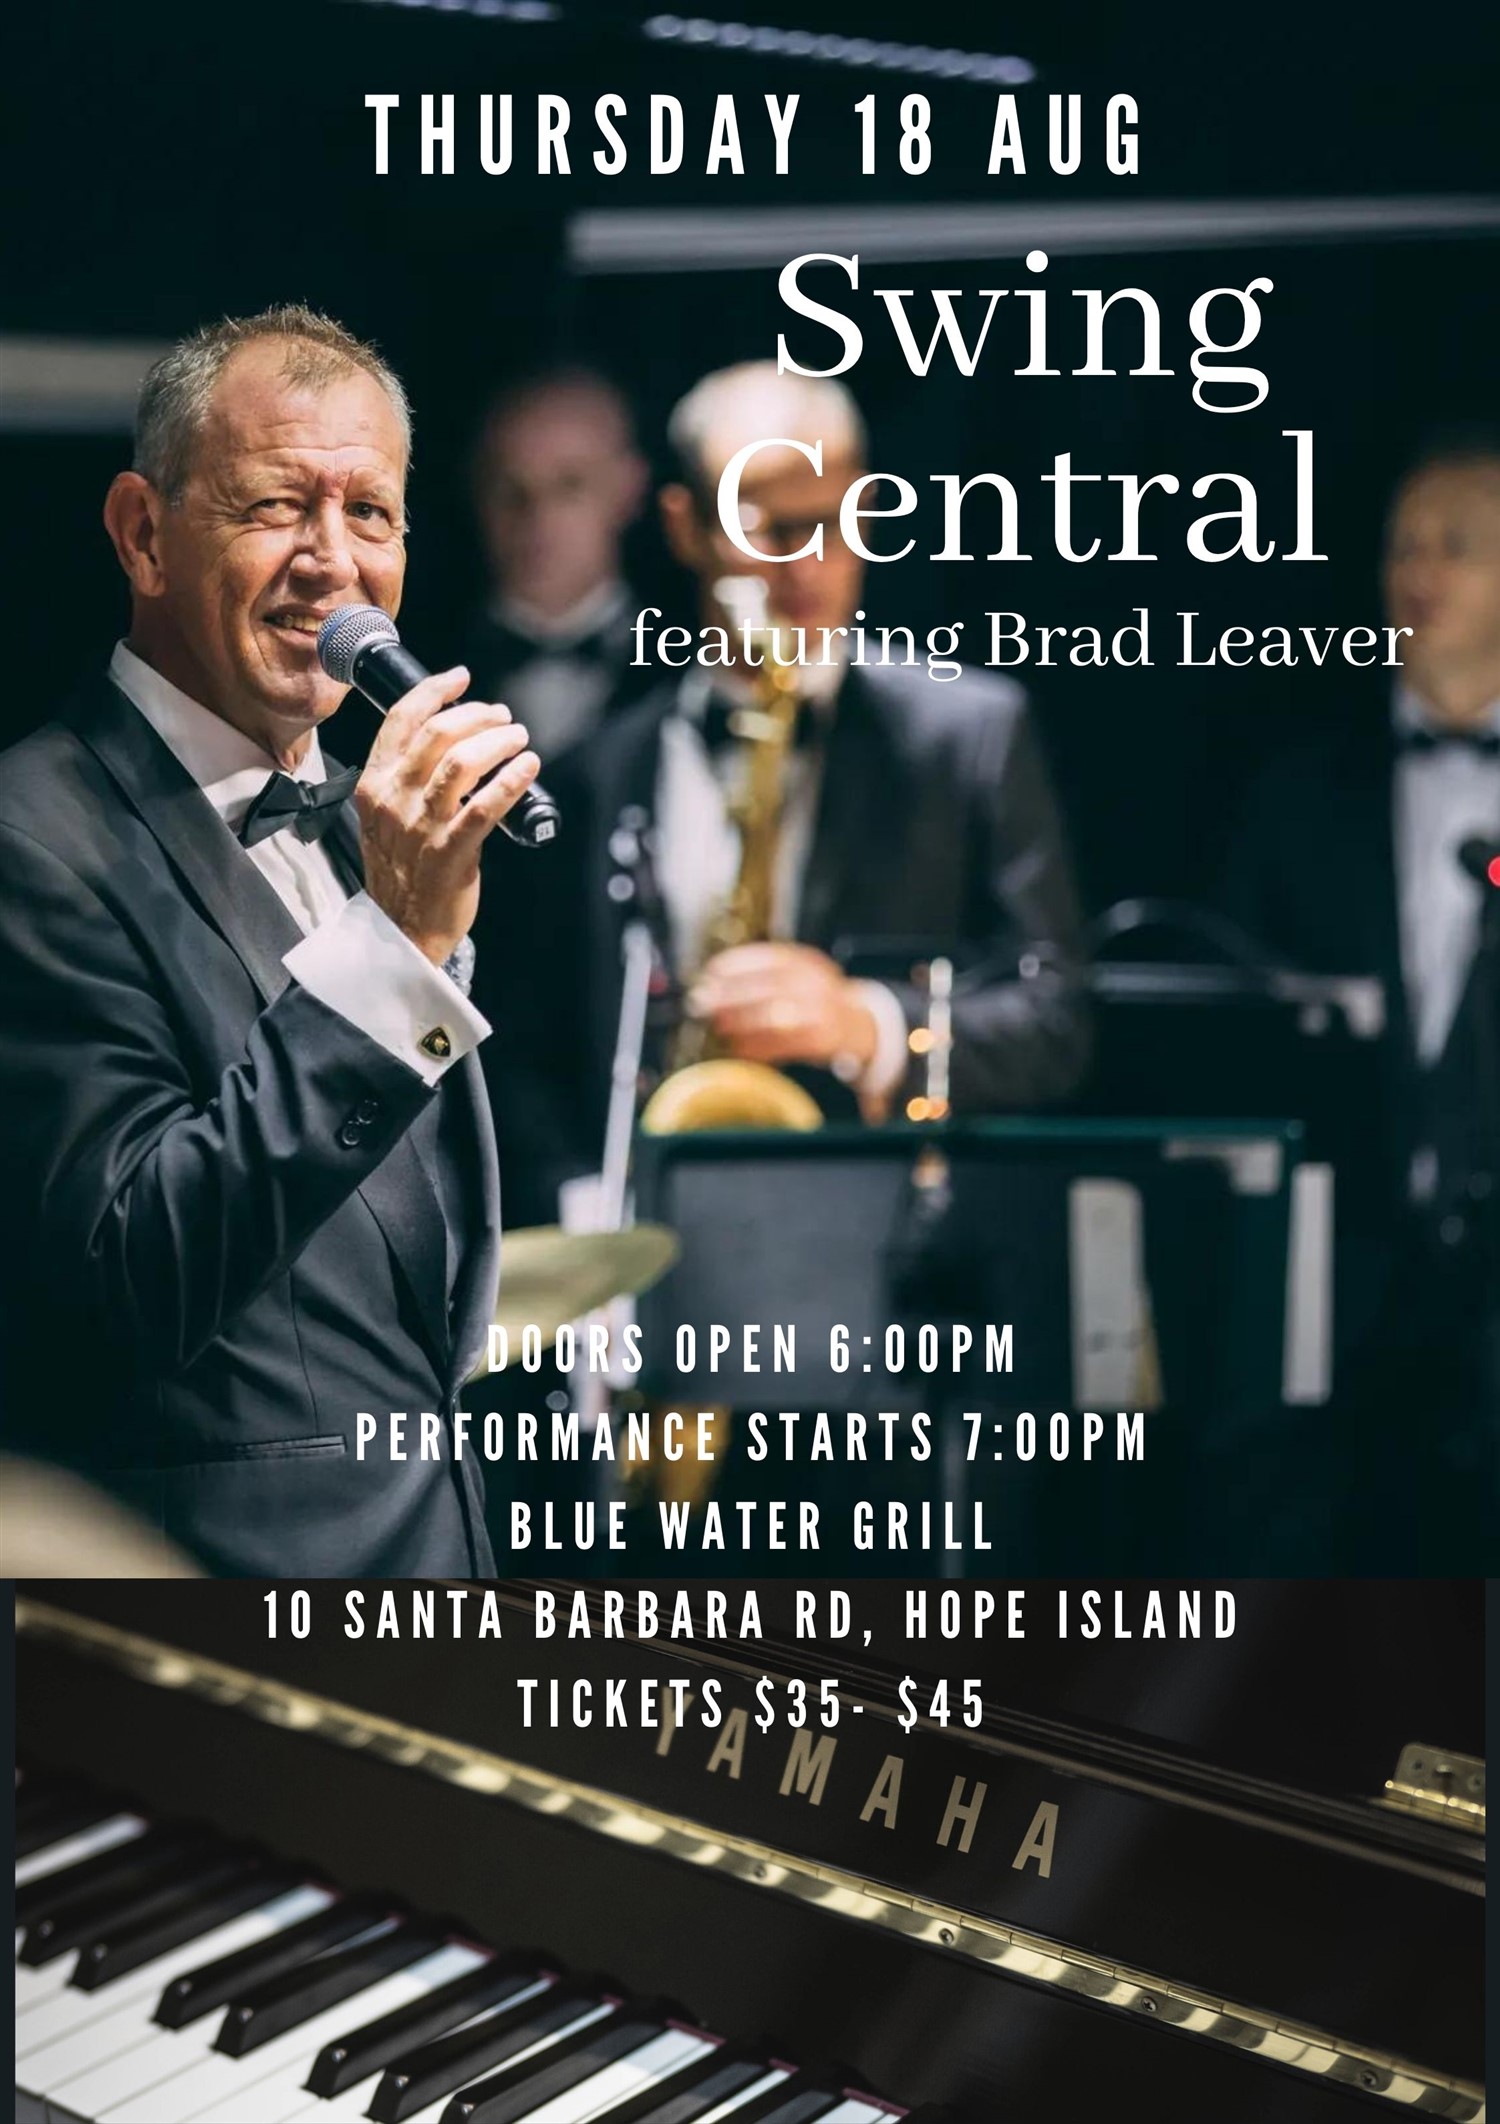 Swing Central Quartet featuring Brad Leaver on Aug 18, 18:00@Hope Island Jazz - Blue Water Grill - Buy tickets and Get information on  